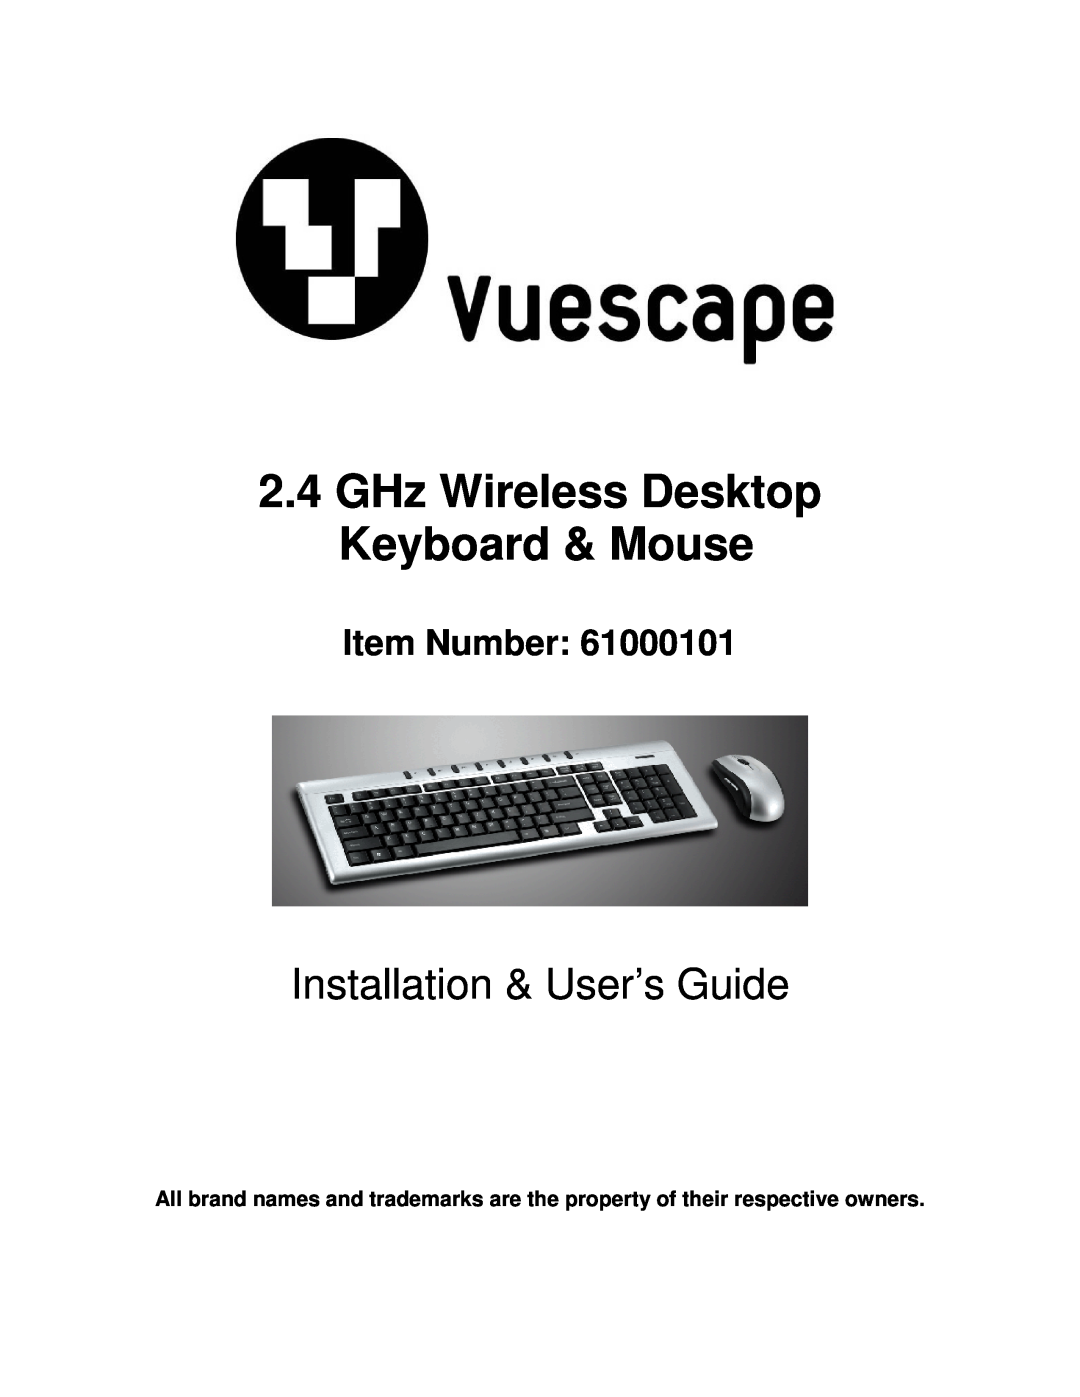 Compaq 61000101 manual GHz Wireless Desktop Keyboard & Mouse, Installation & User’s Guide, Item Number 